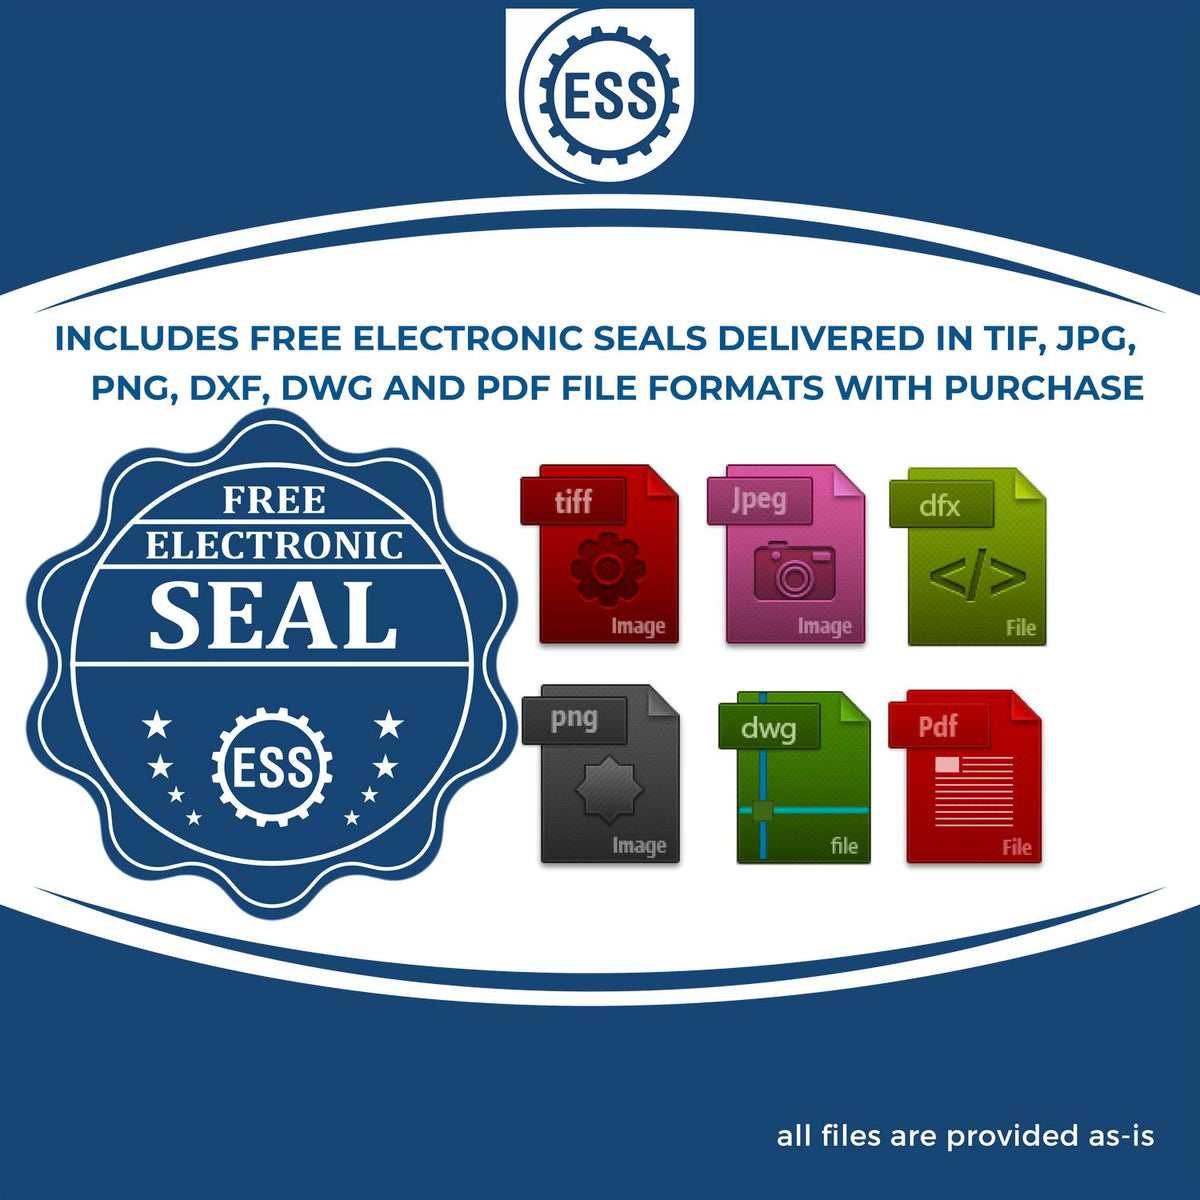 An infographic for the free electronic seal for the State of Mississippi Extended Long Reach Engineer Seal illustrating the different file type icons such as DXF, DWG, TIF, JPG and PNG.